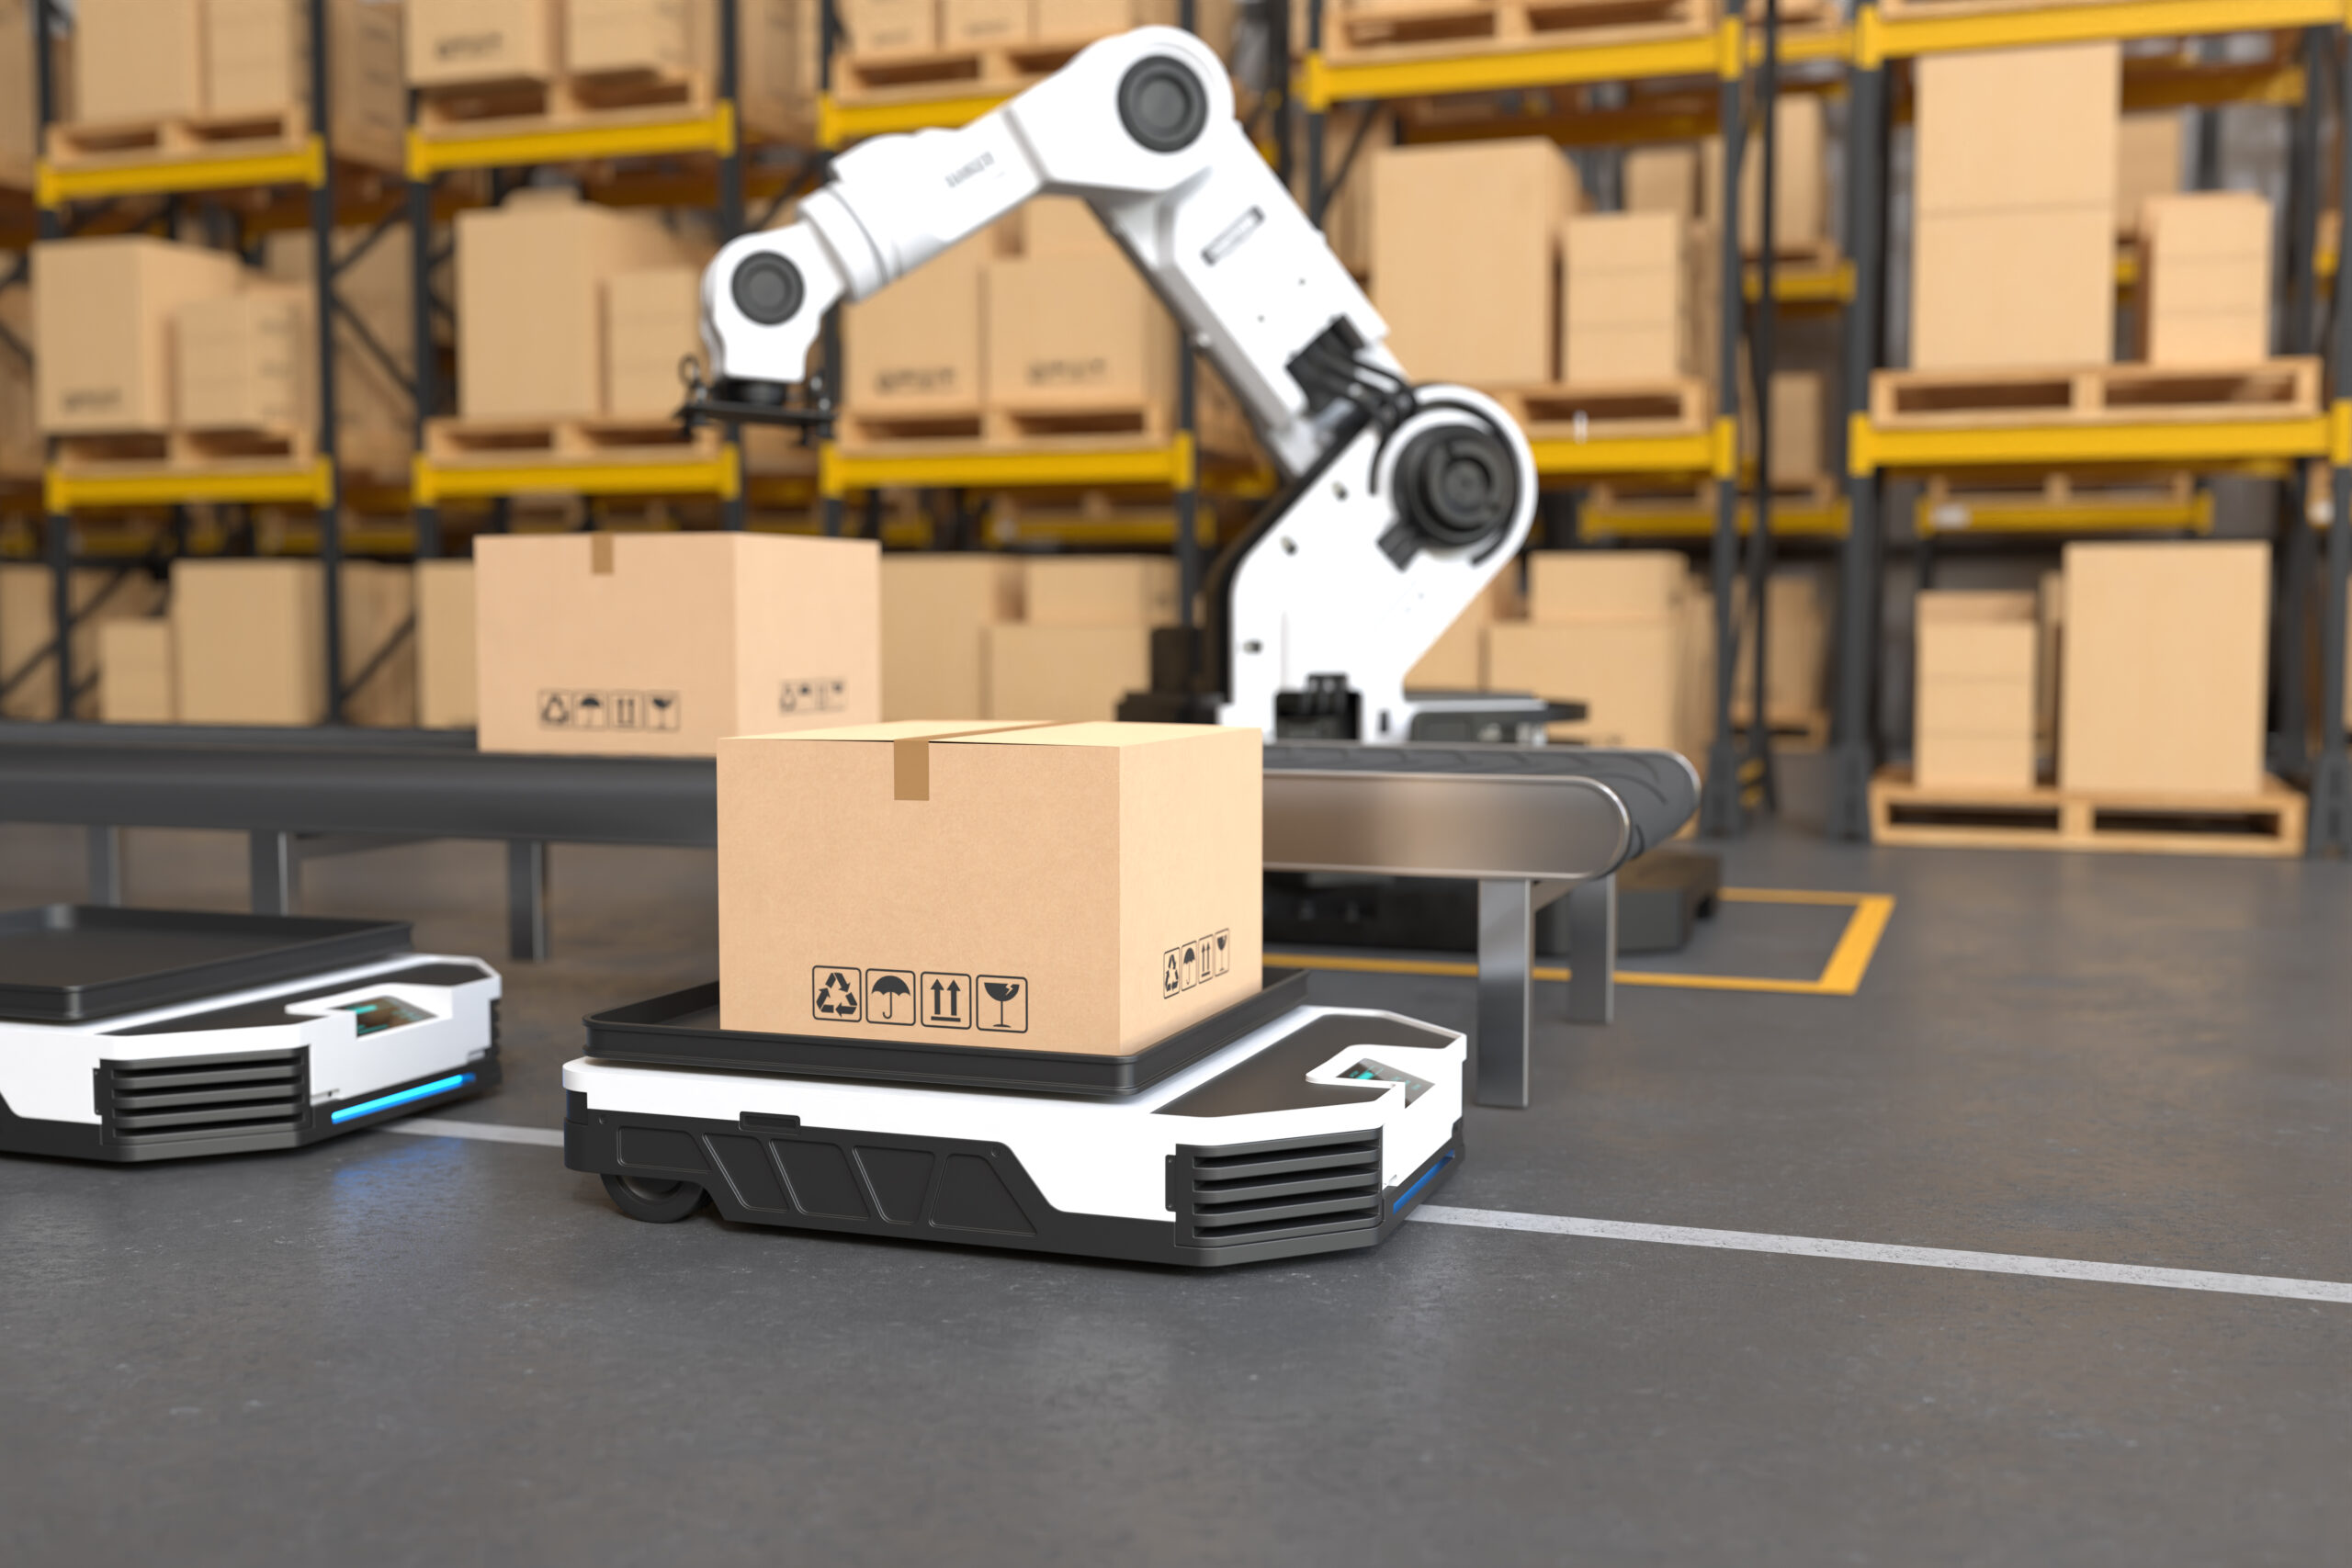 Logistics and the Use of AR and VR